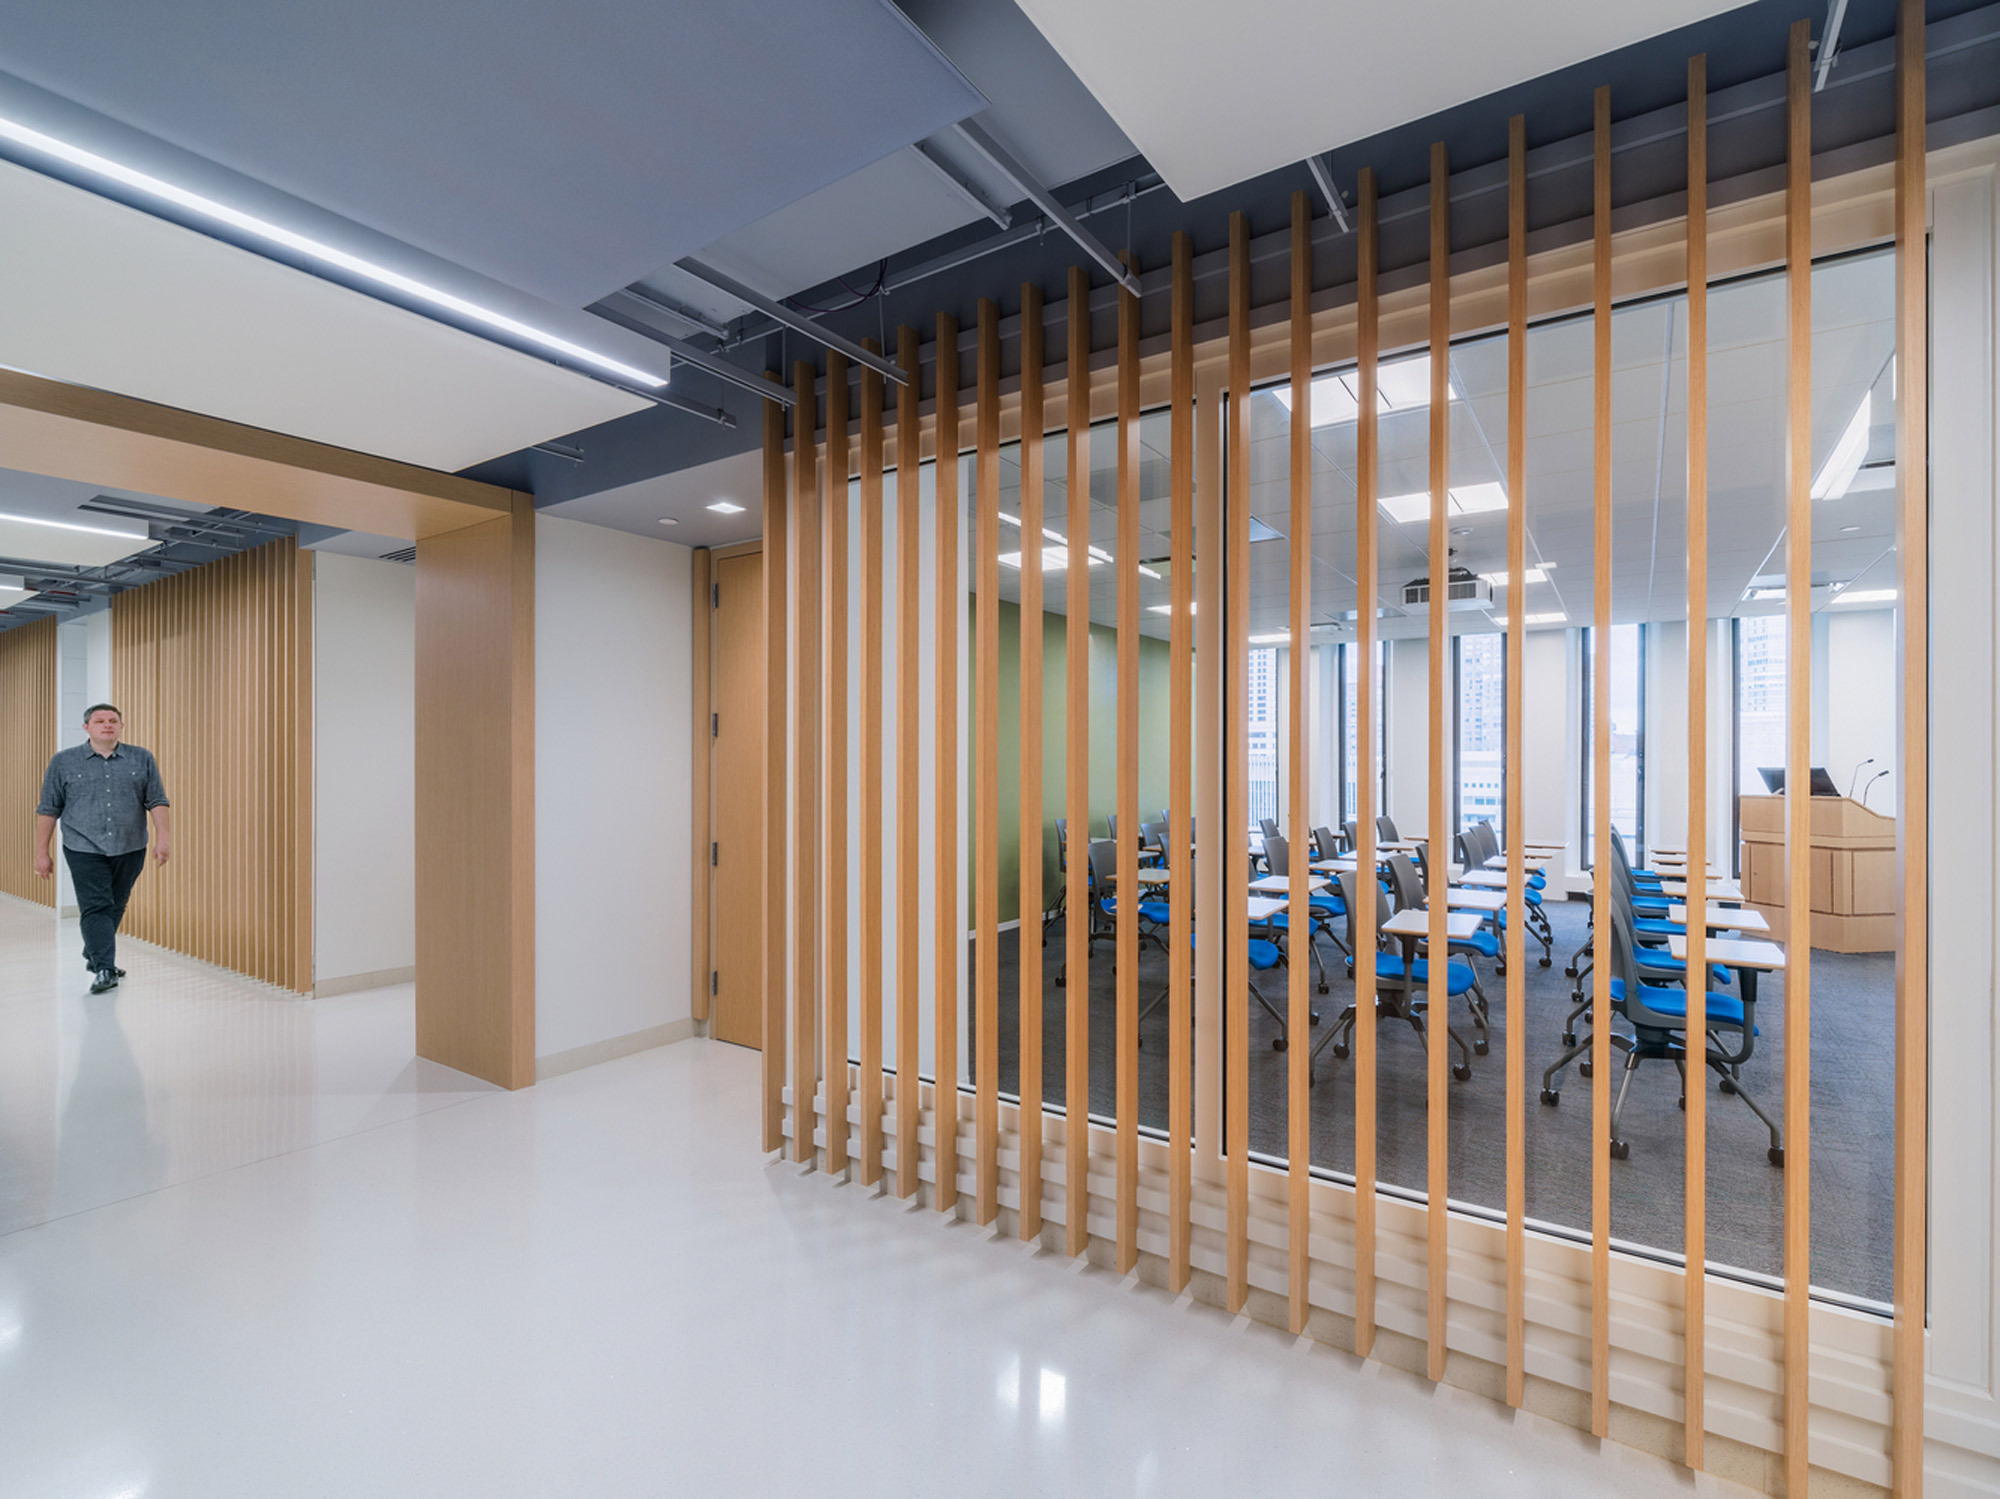 Modern office space showcasing a creative partition of vertical wooden slats, enhancing the flow between a walkway and a conference room with blue chairs. The design promotes transparency while offering a sense of separation, complemented by sleek lighting fixtures and a neutral color palette.